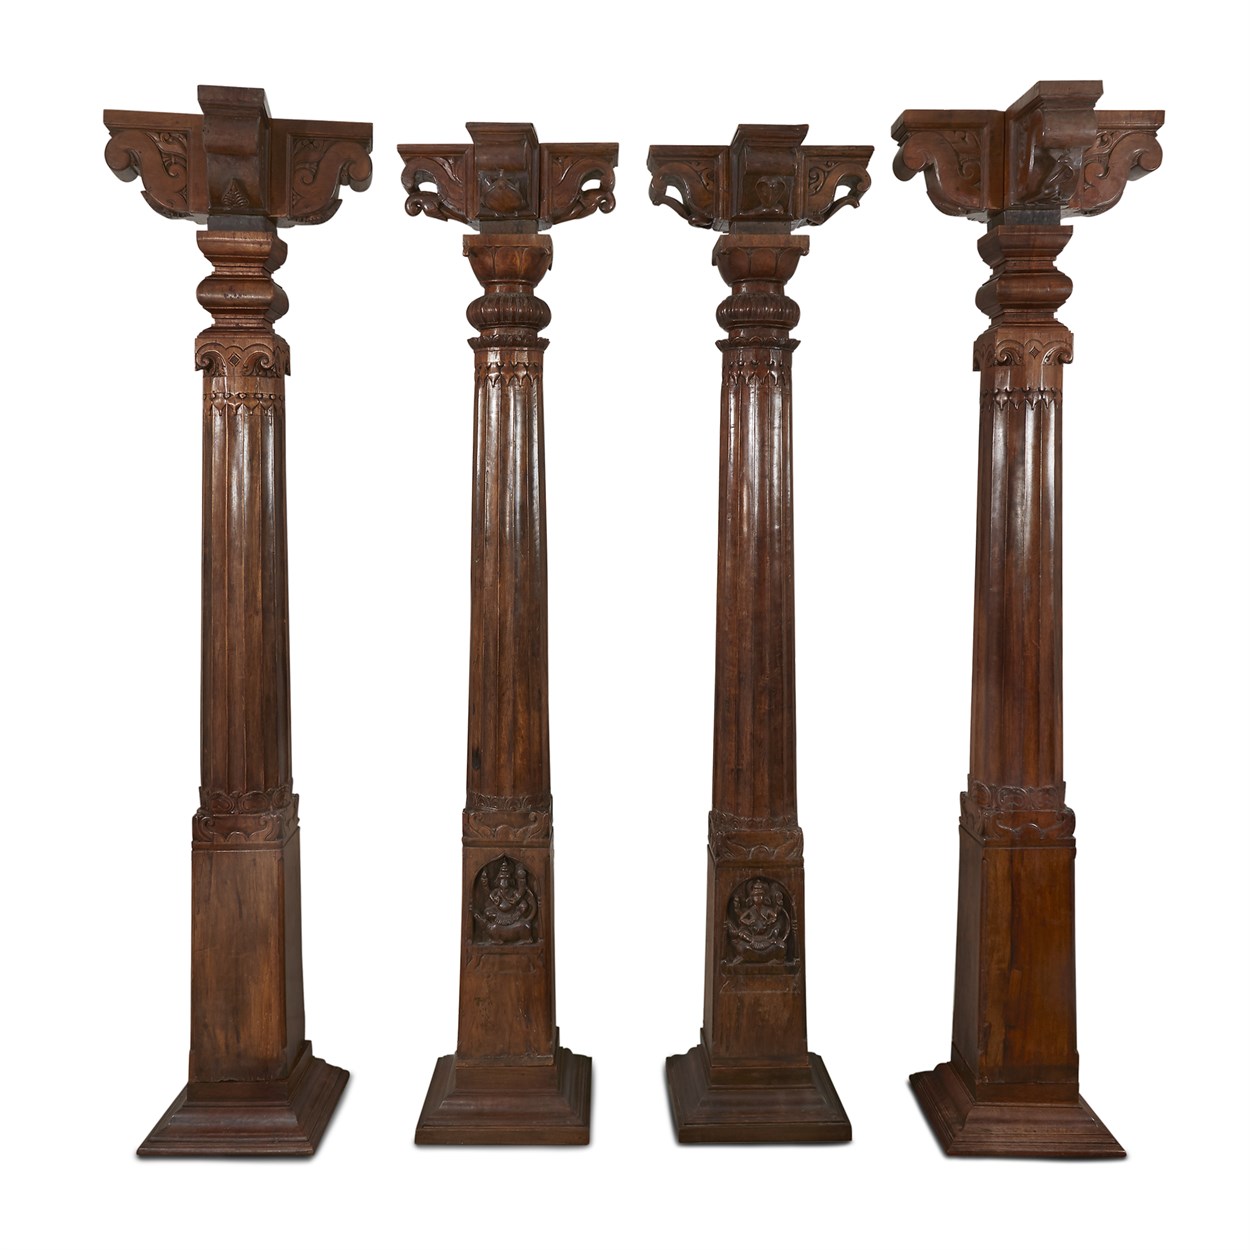 Lot 126 - A set of four associated Indian carved teak columns, capitals and bases